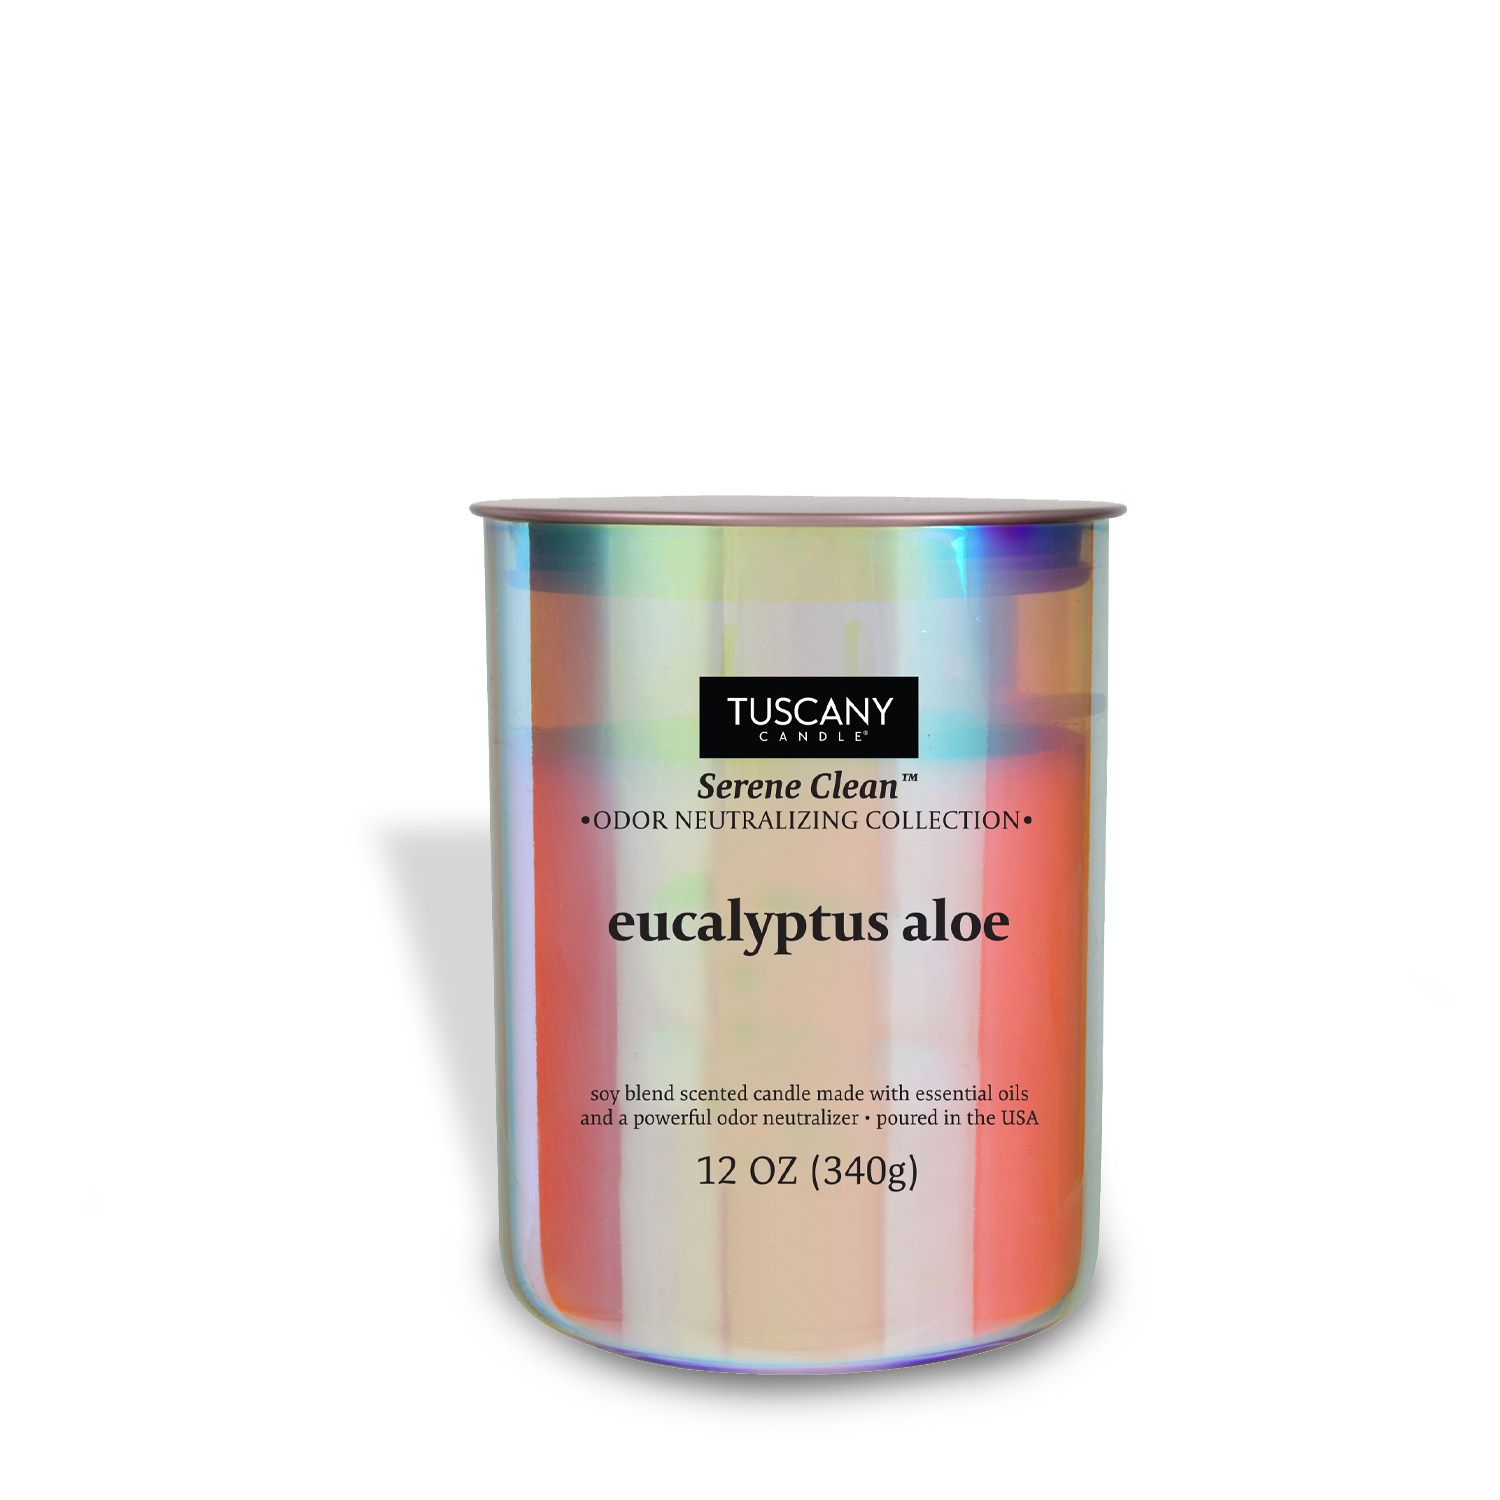 Eucalyptus Aloe, an odor-controlling candle from Tuscany Candle's Serene Clean® collection of scented candles